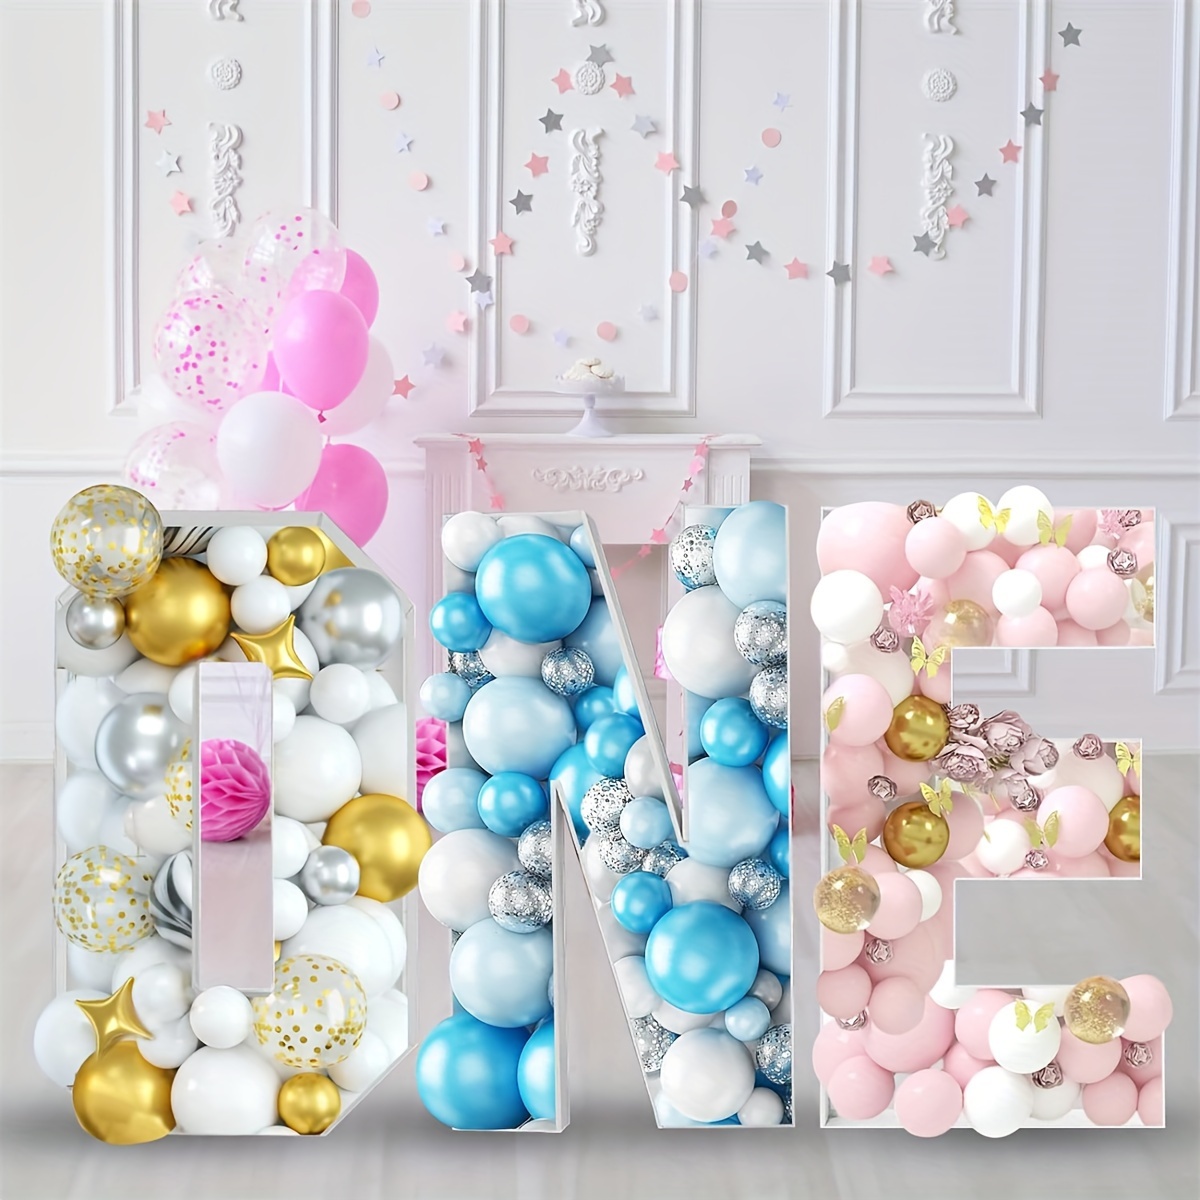 1pc, 28in Tall Mosaic Balloon Frame Pre-Cut Foam Board Big Marquee Letters DIY Kit For Birthday Party Wedding Backdrop Decor Letter